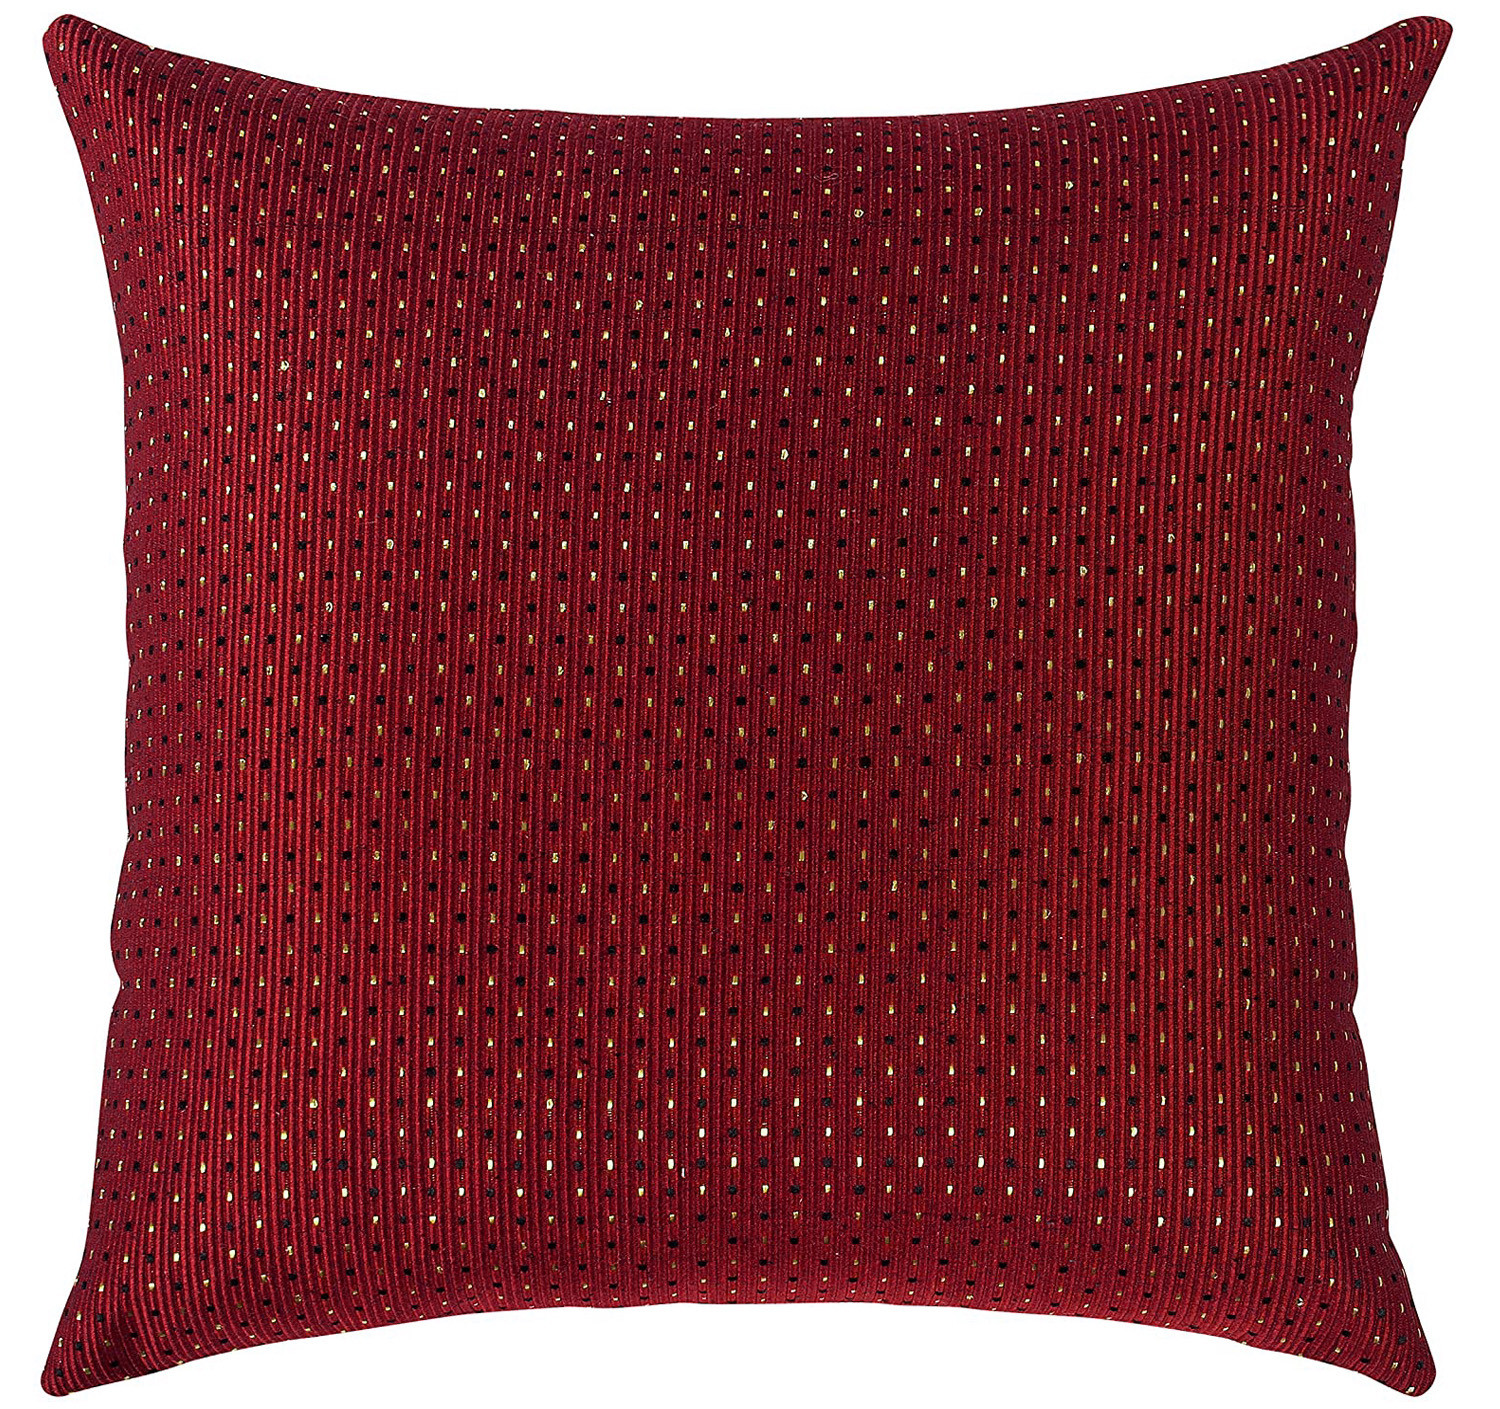 Kuber Industries Dot Print Soft Decorative Square Cushion Cover, Cushion Case For Sofa Couch Bed 16x16 Inch-(Maroon)